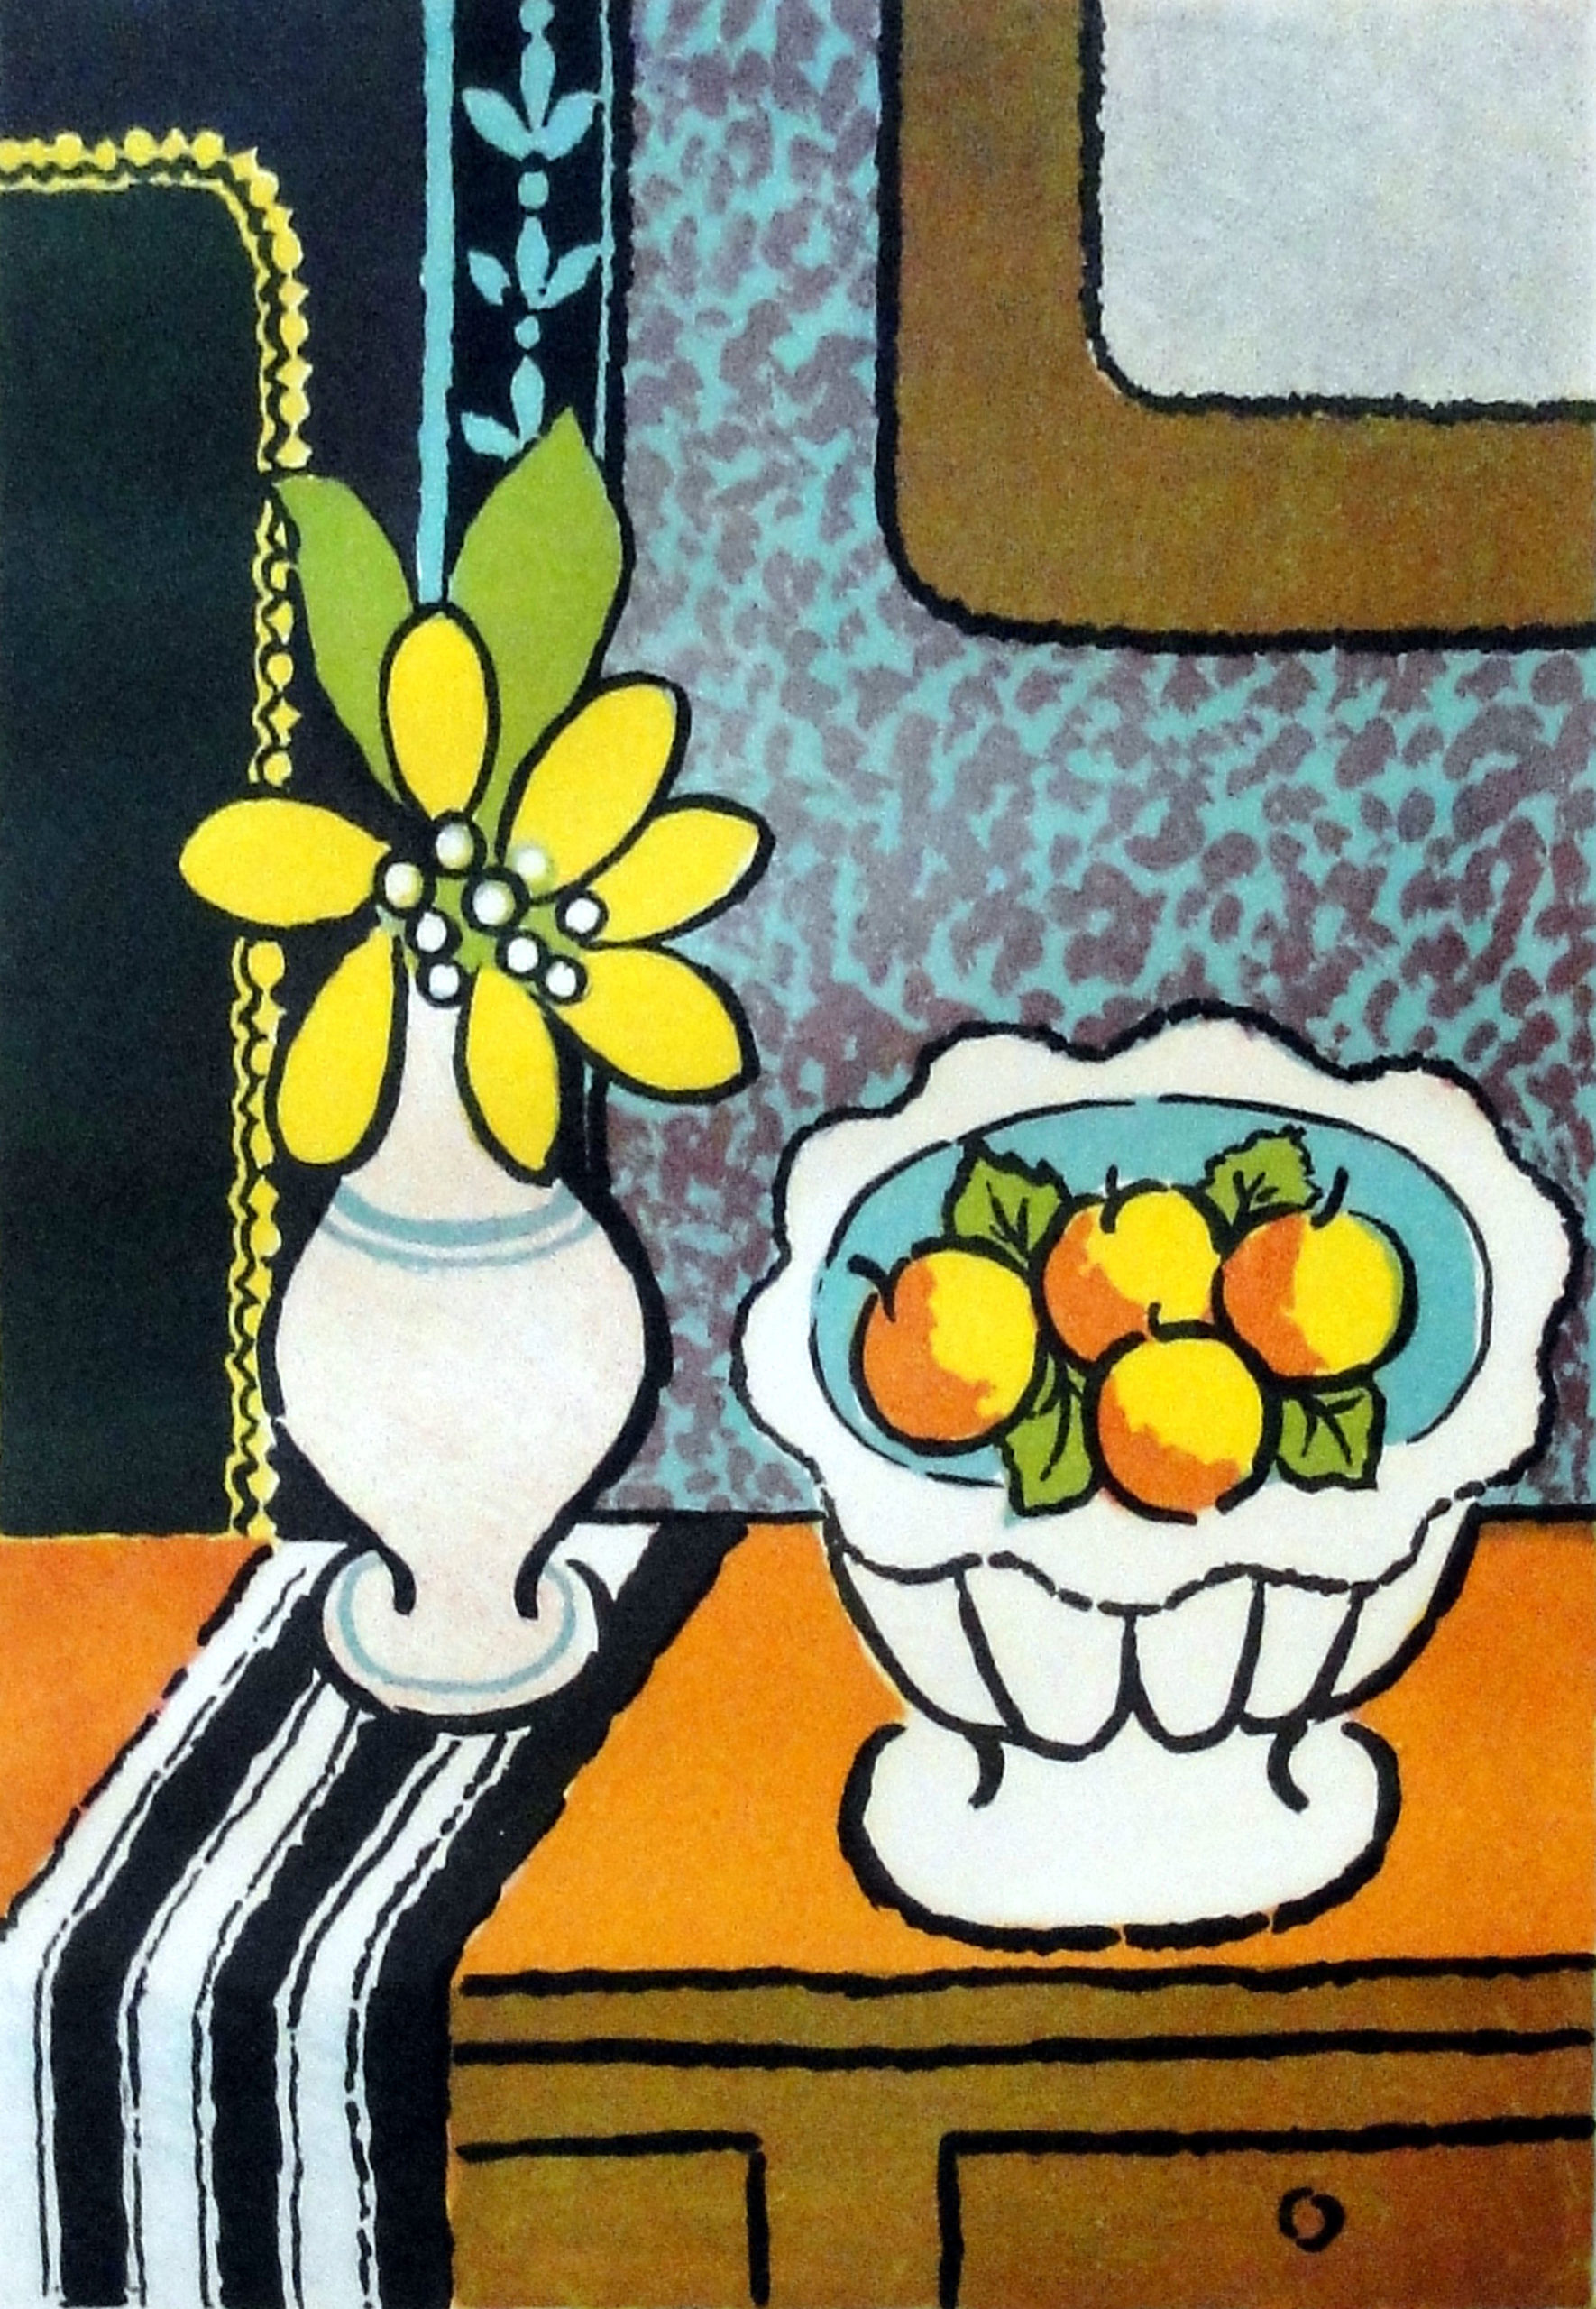 Alexander Vedernikov (Russian, 1898-1975), Still Life with Striped Scarf, 1960, lithograph, 24 ½ x 18 3/8 in., The Art Collection at The Hebrew Home at Riverdale